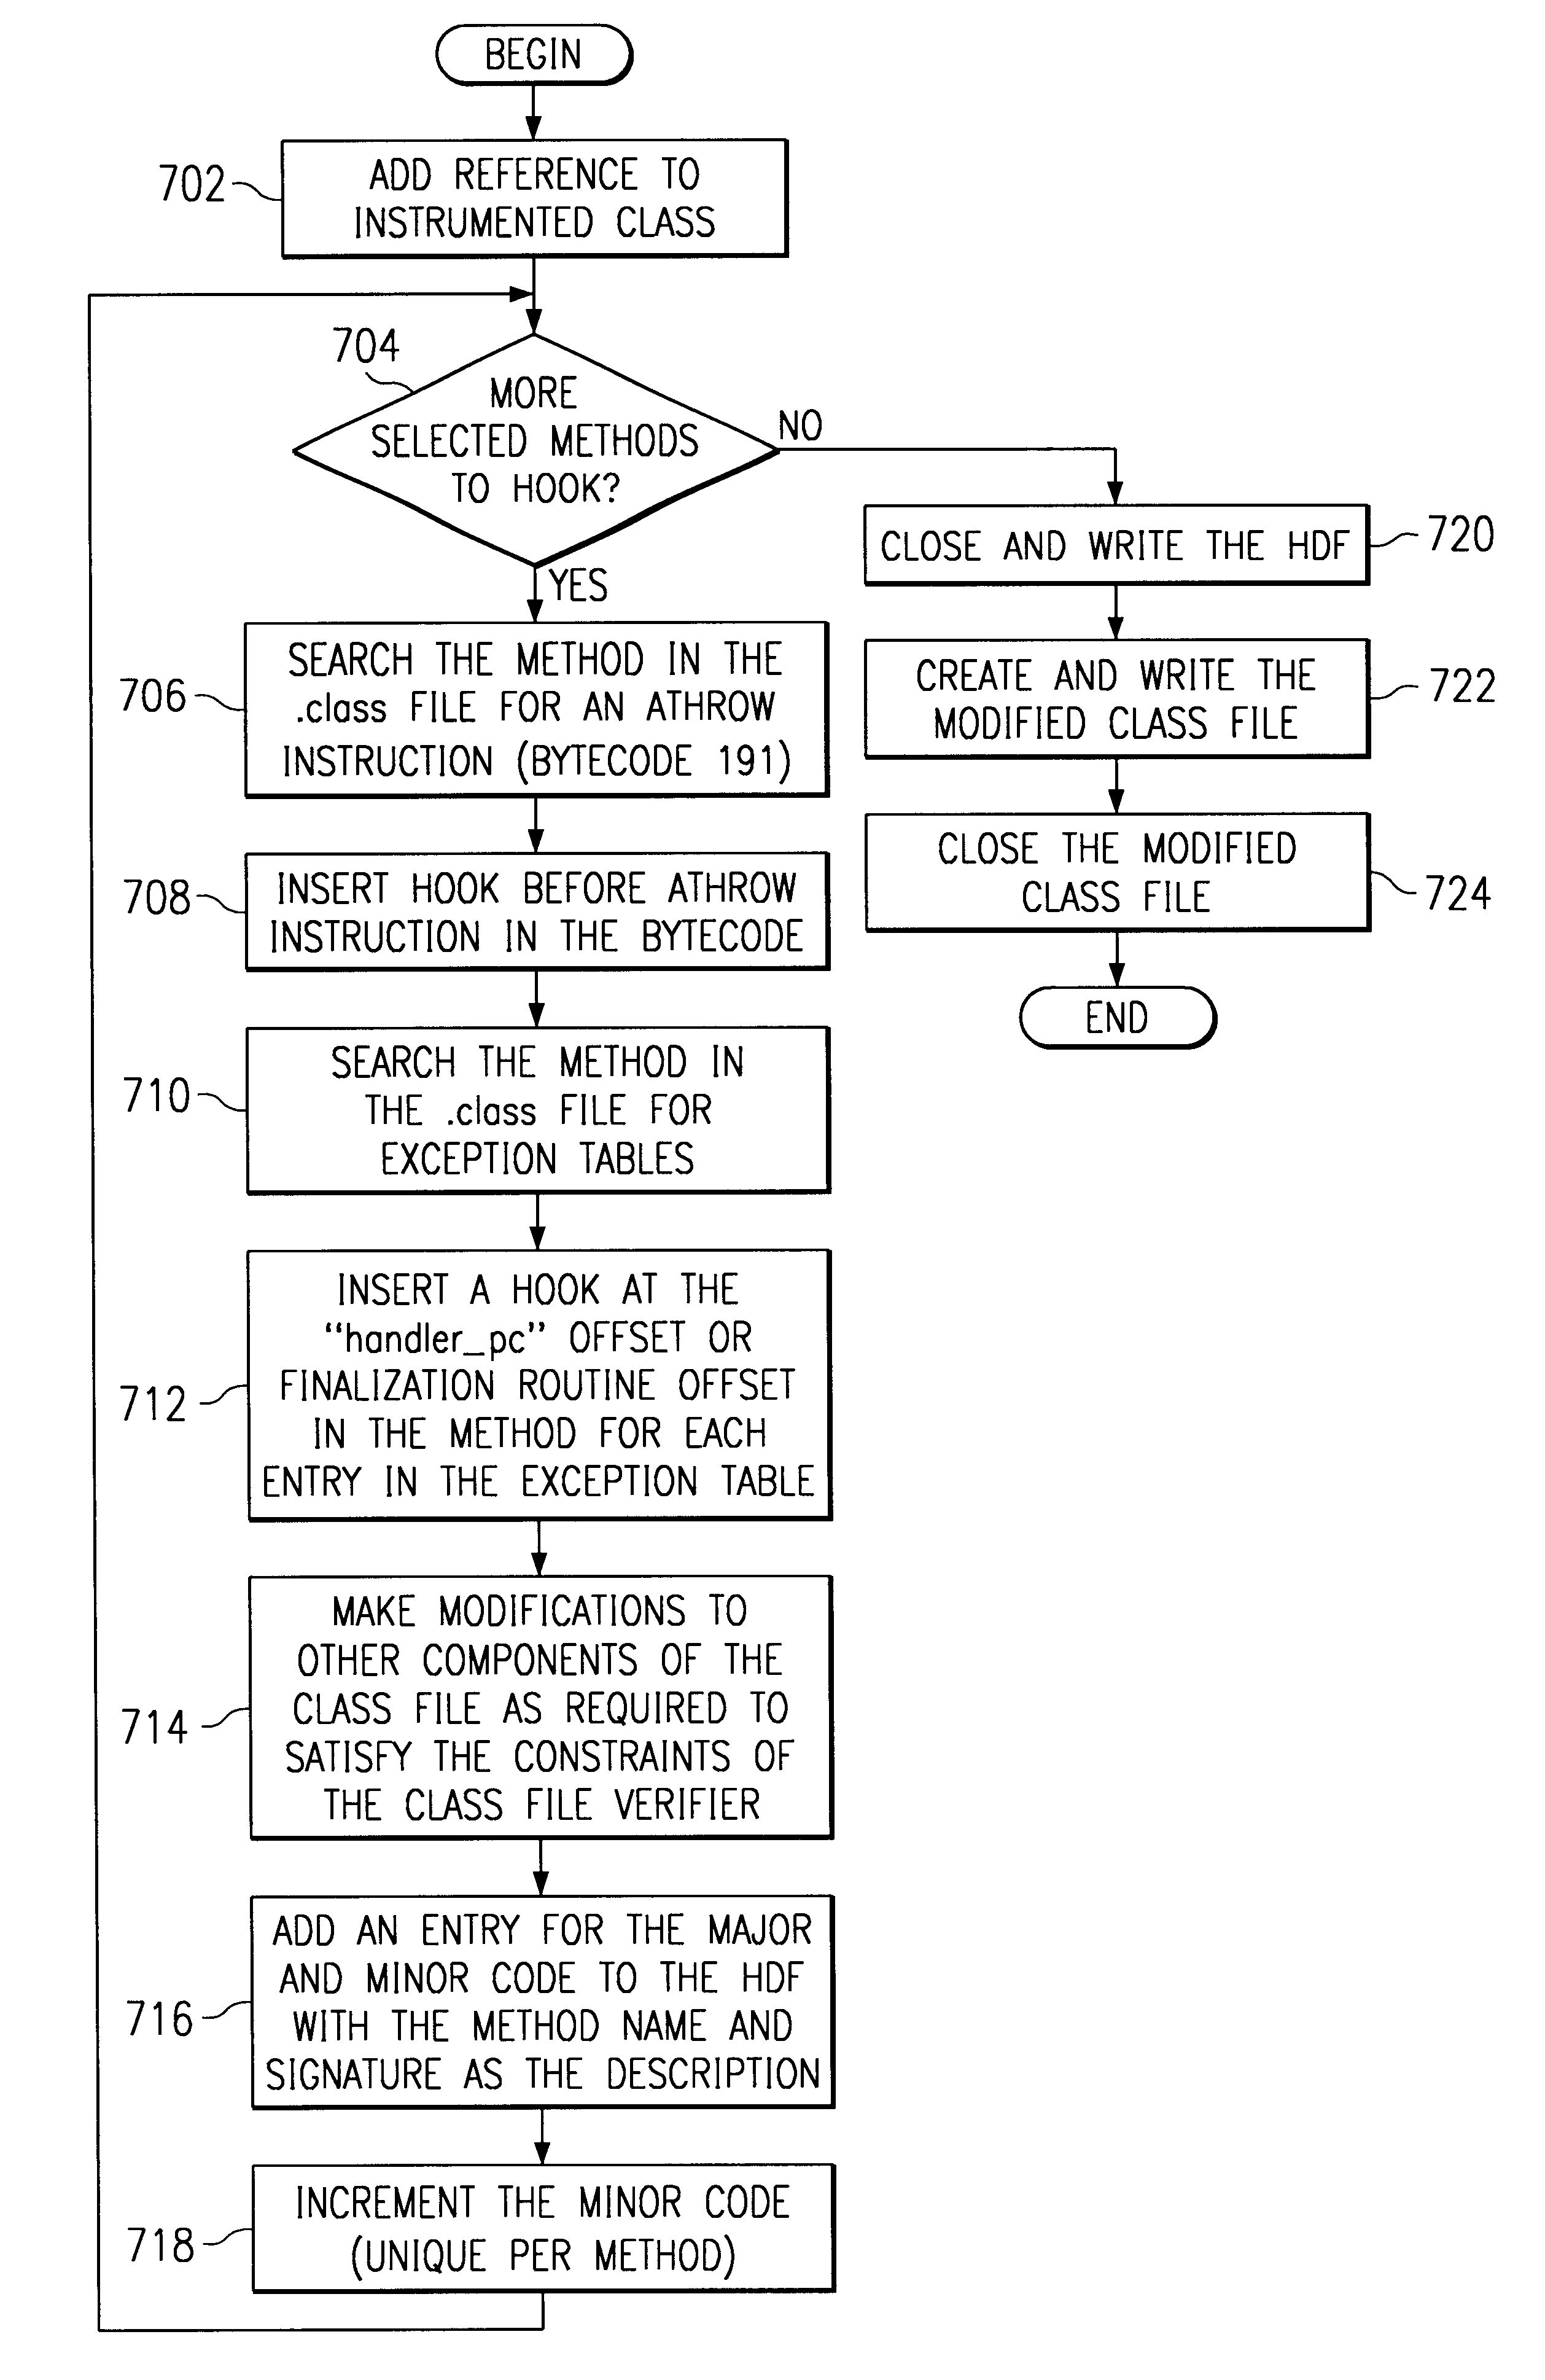 System and method for injecting hooks into Java classes to handle exception and finalization processing